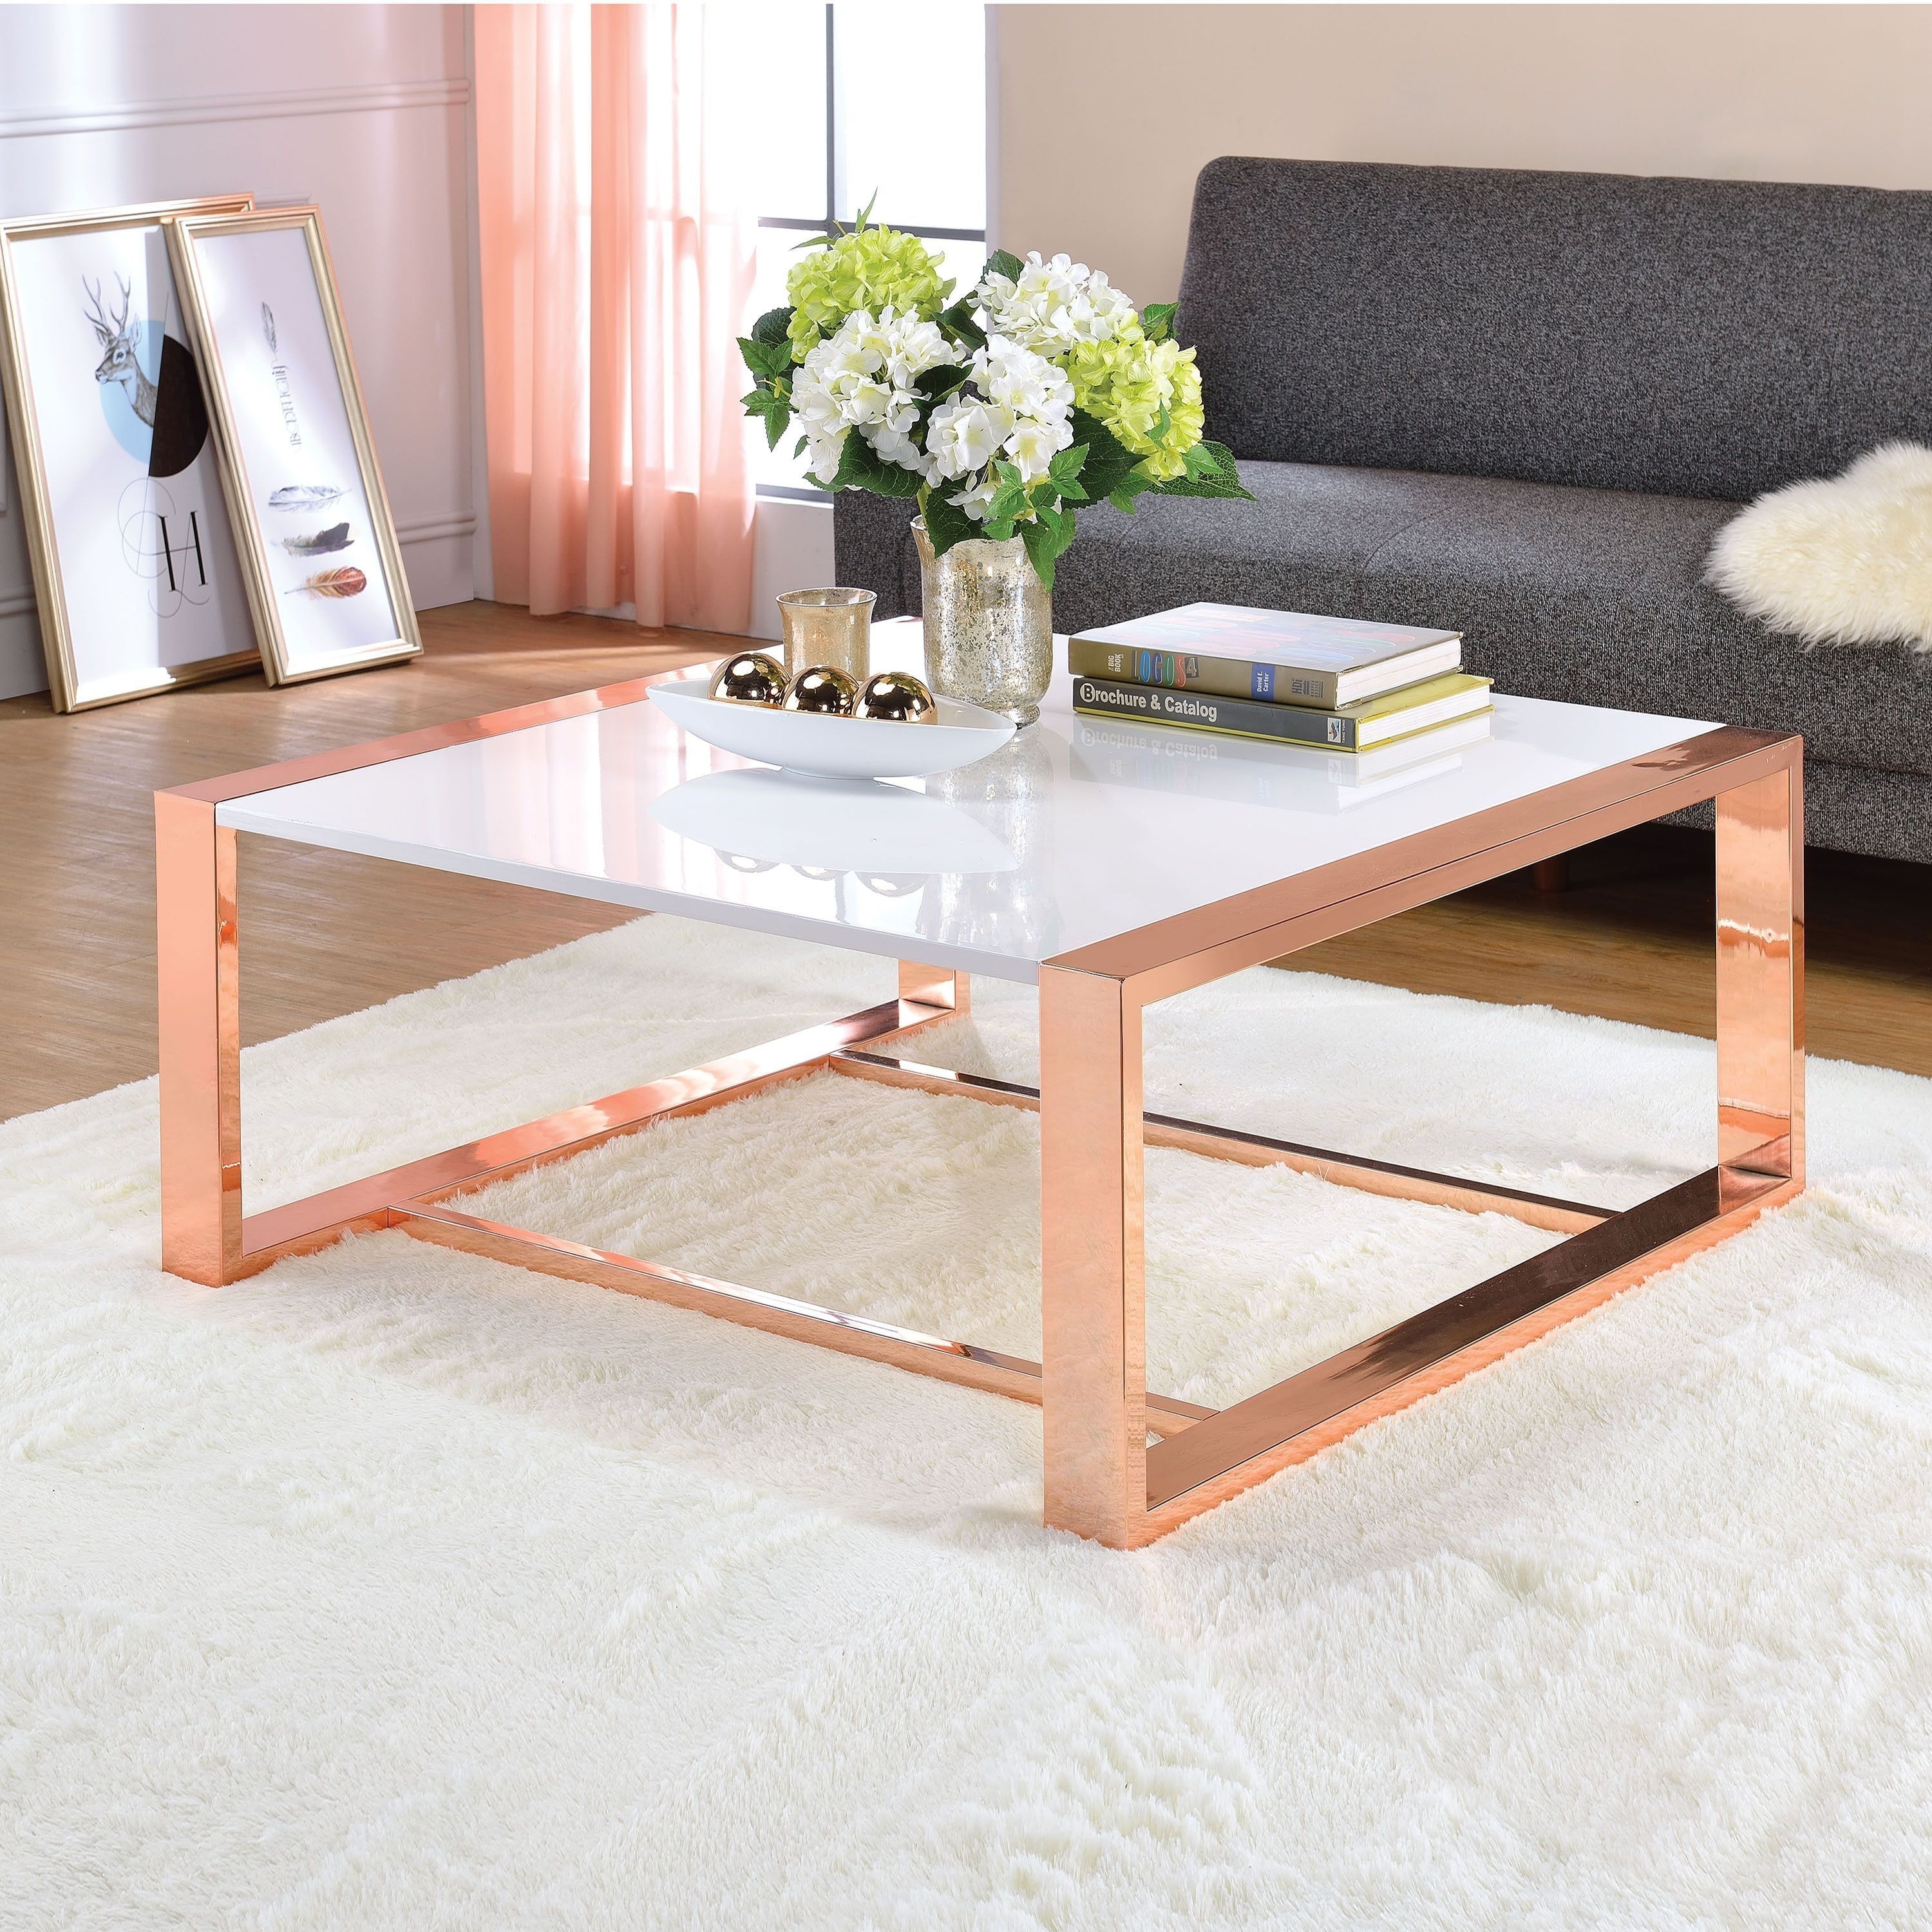 Acme Furniture Porviche White High Gloss And Rose Gold Coffee Table With Stack Hi Gloss Wood Coffee Tables (View 2 of 30)